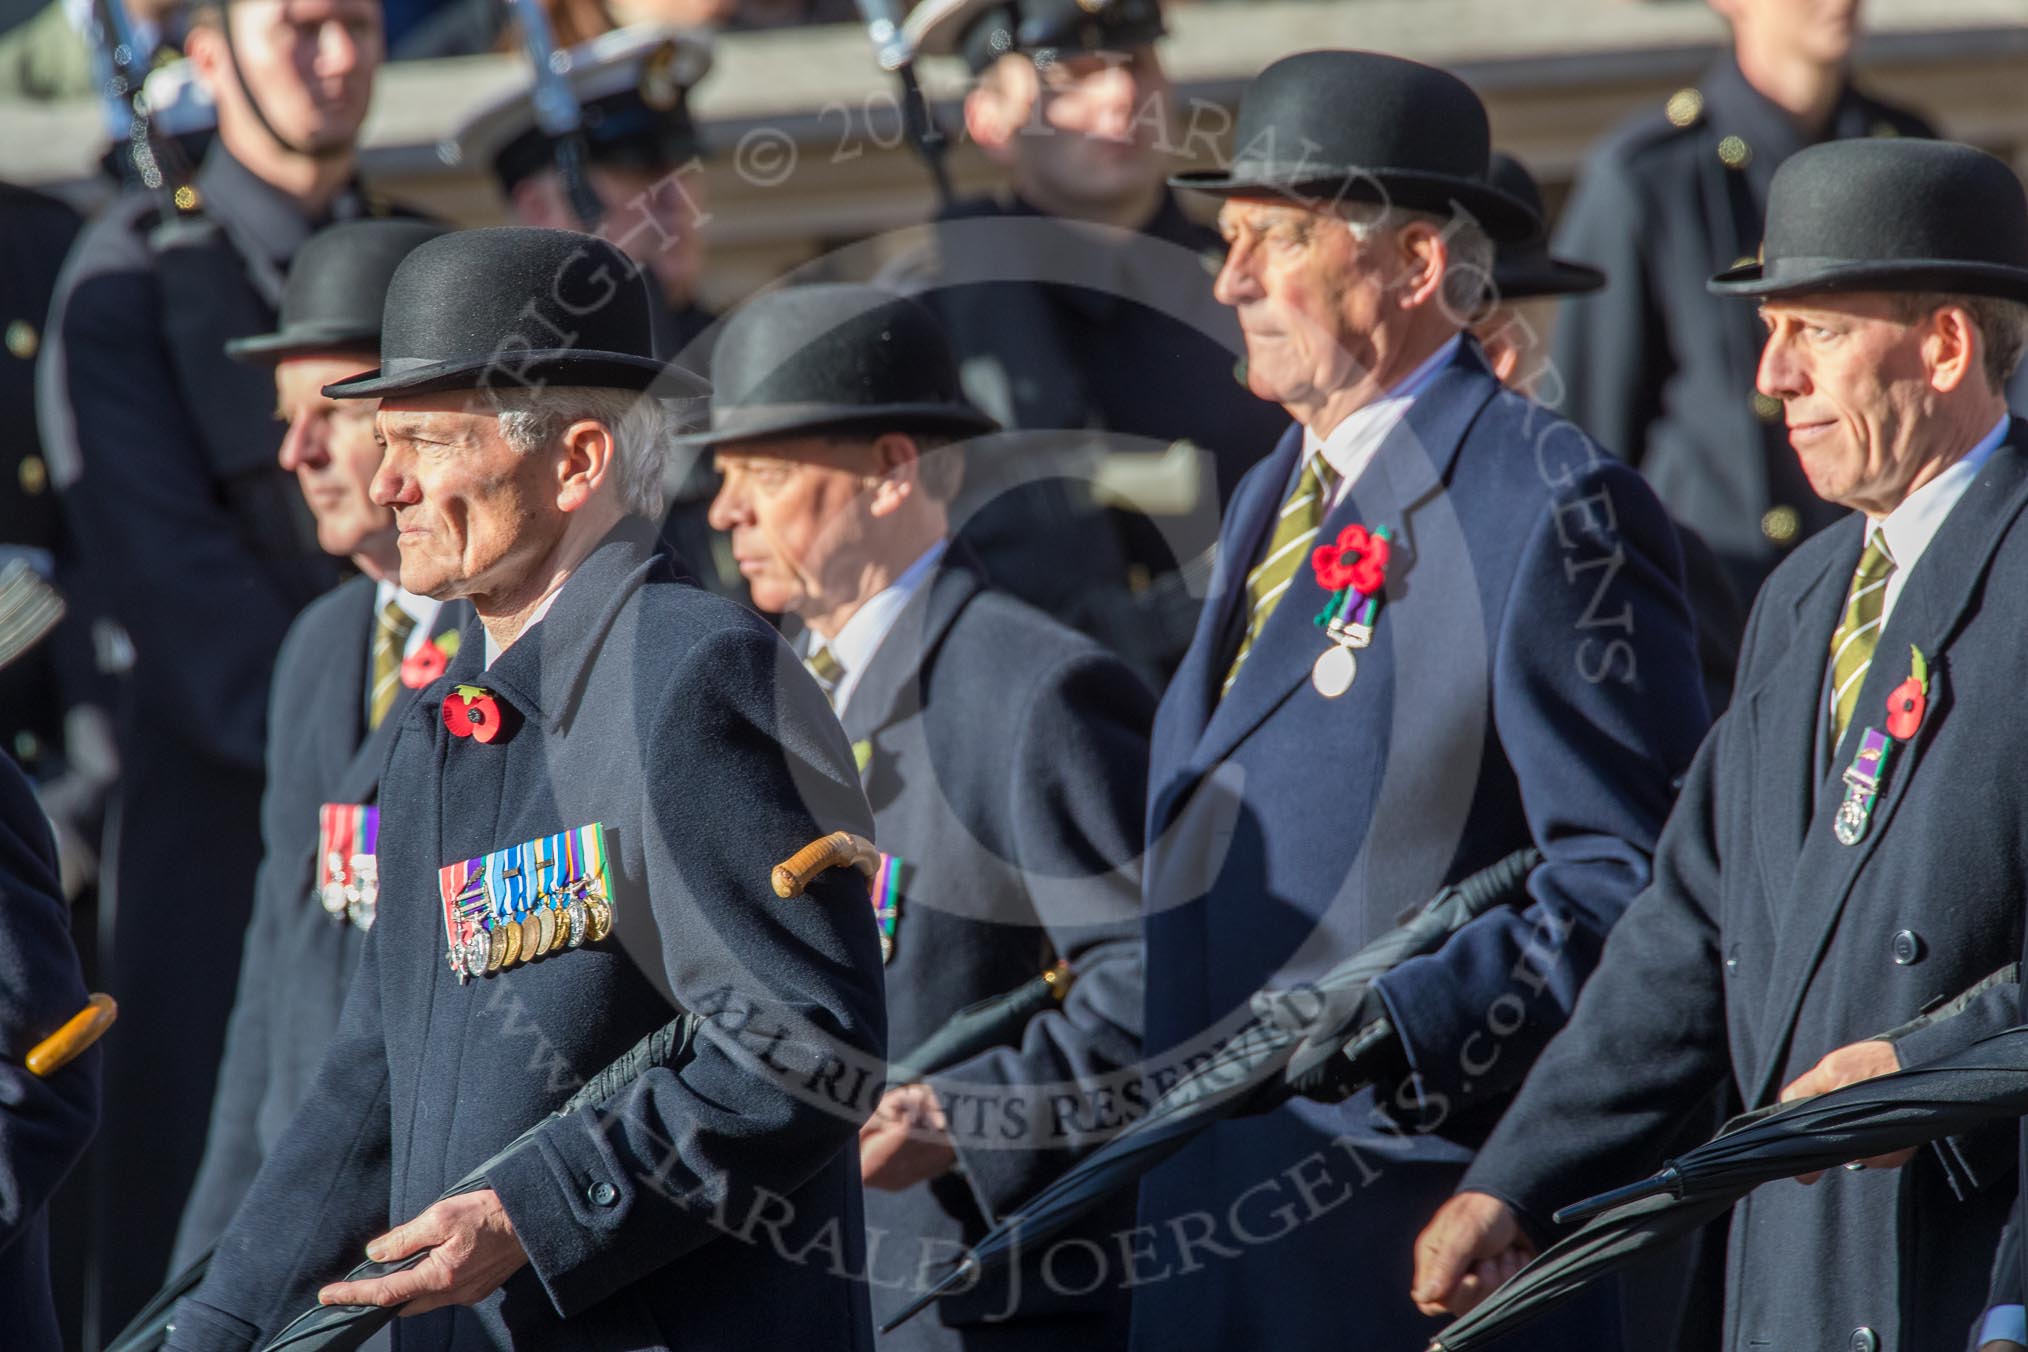 Green Howards Association (Group A22, 35 members) during the Royal British Legion March Past on Remembrance Sunday at the Cenotaph, Whitehall, Westminster, London, 11 November 2018, 11:59.